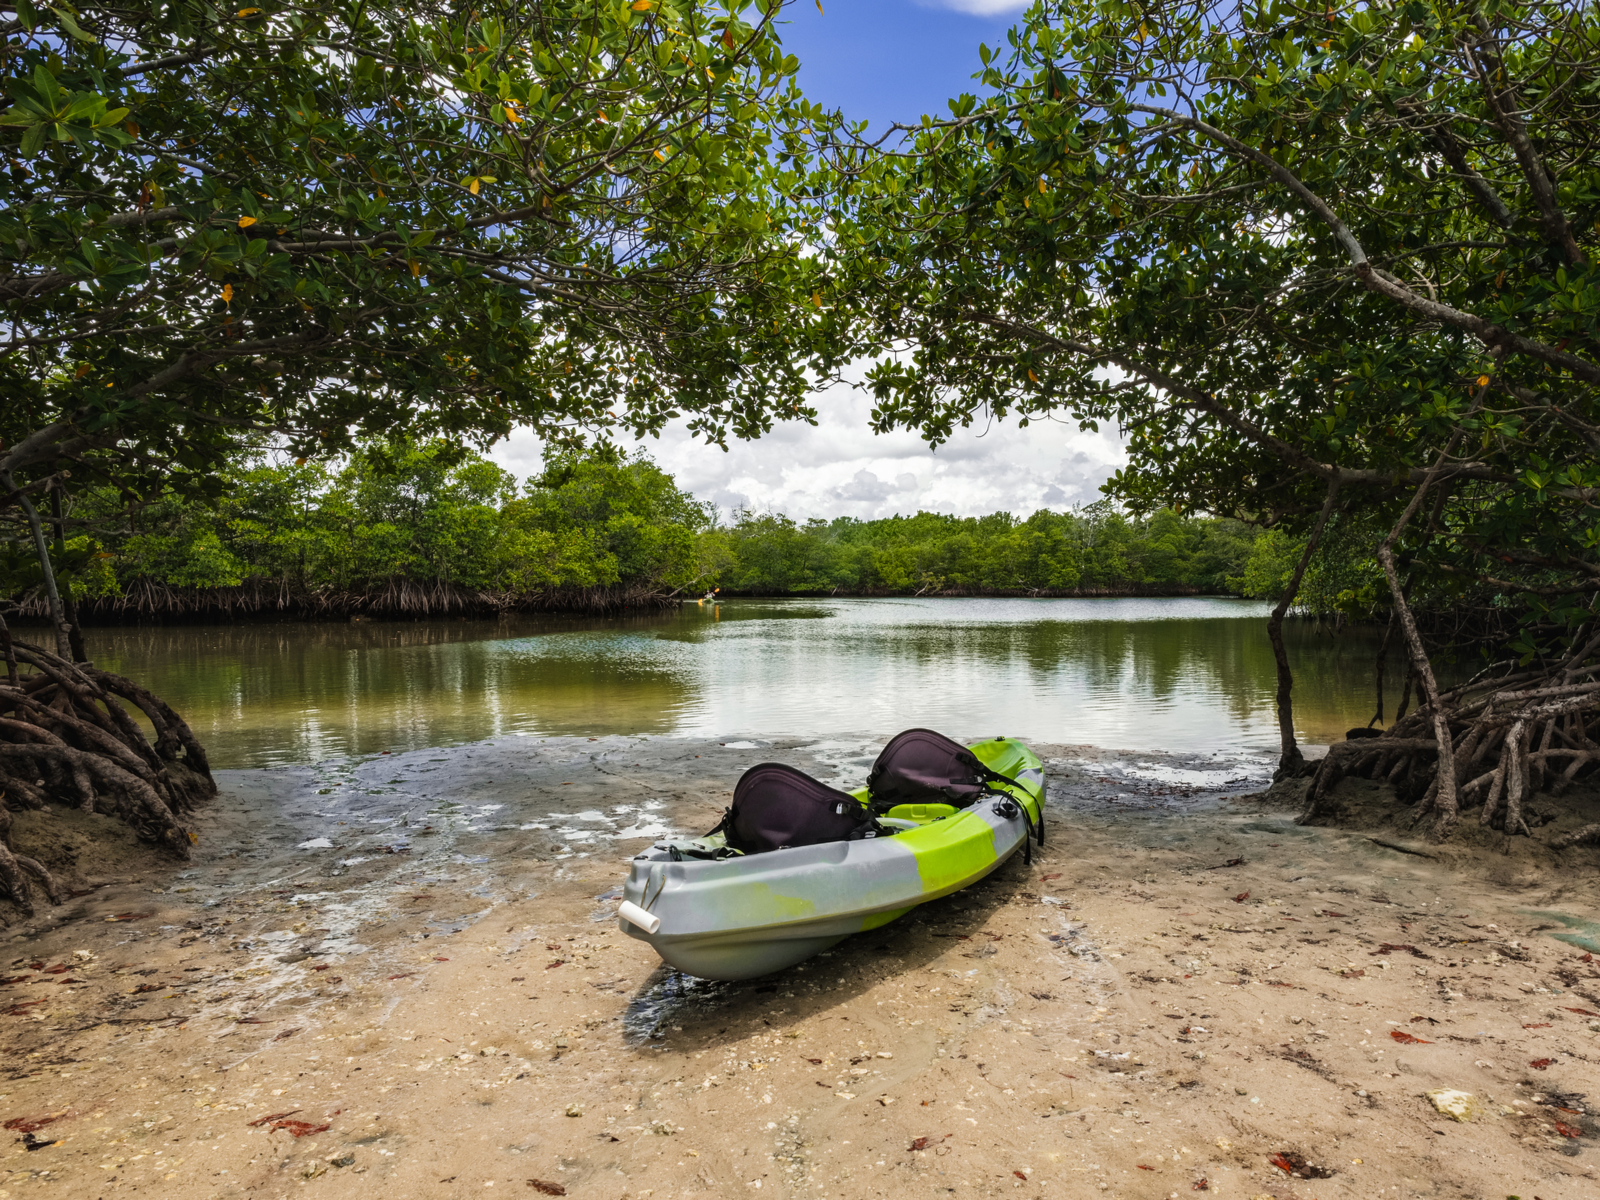 Mid-day view of a mangrove in one of the best things to do in Miami, the Oleta River State Park